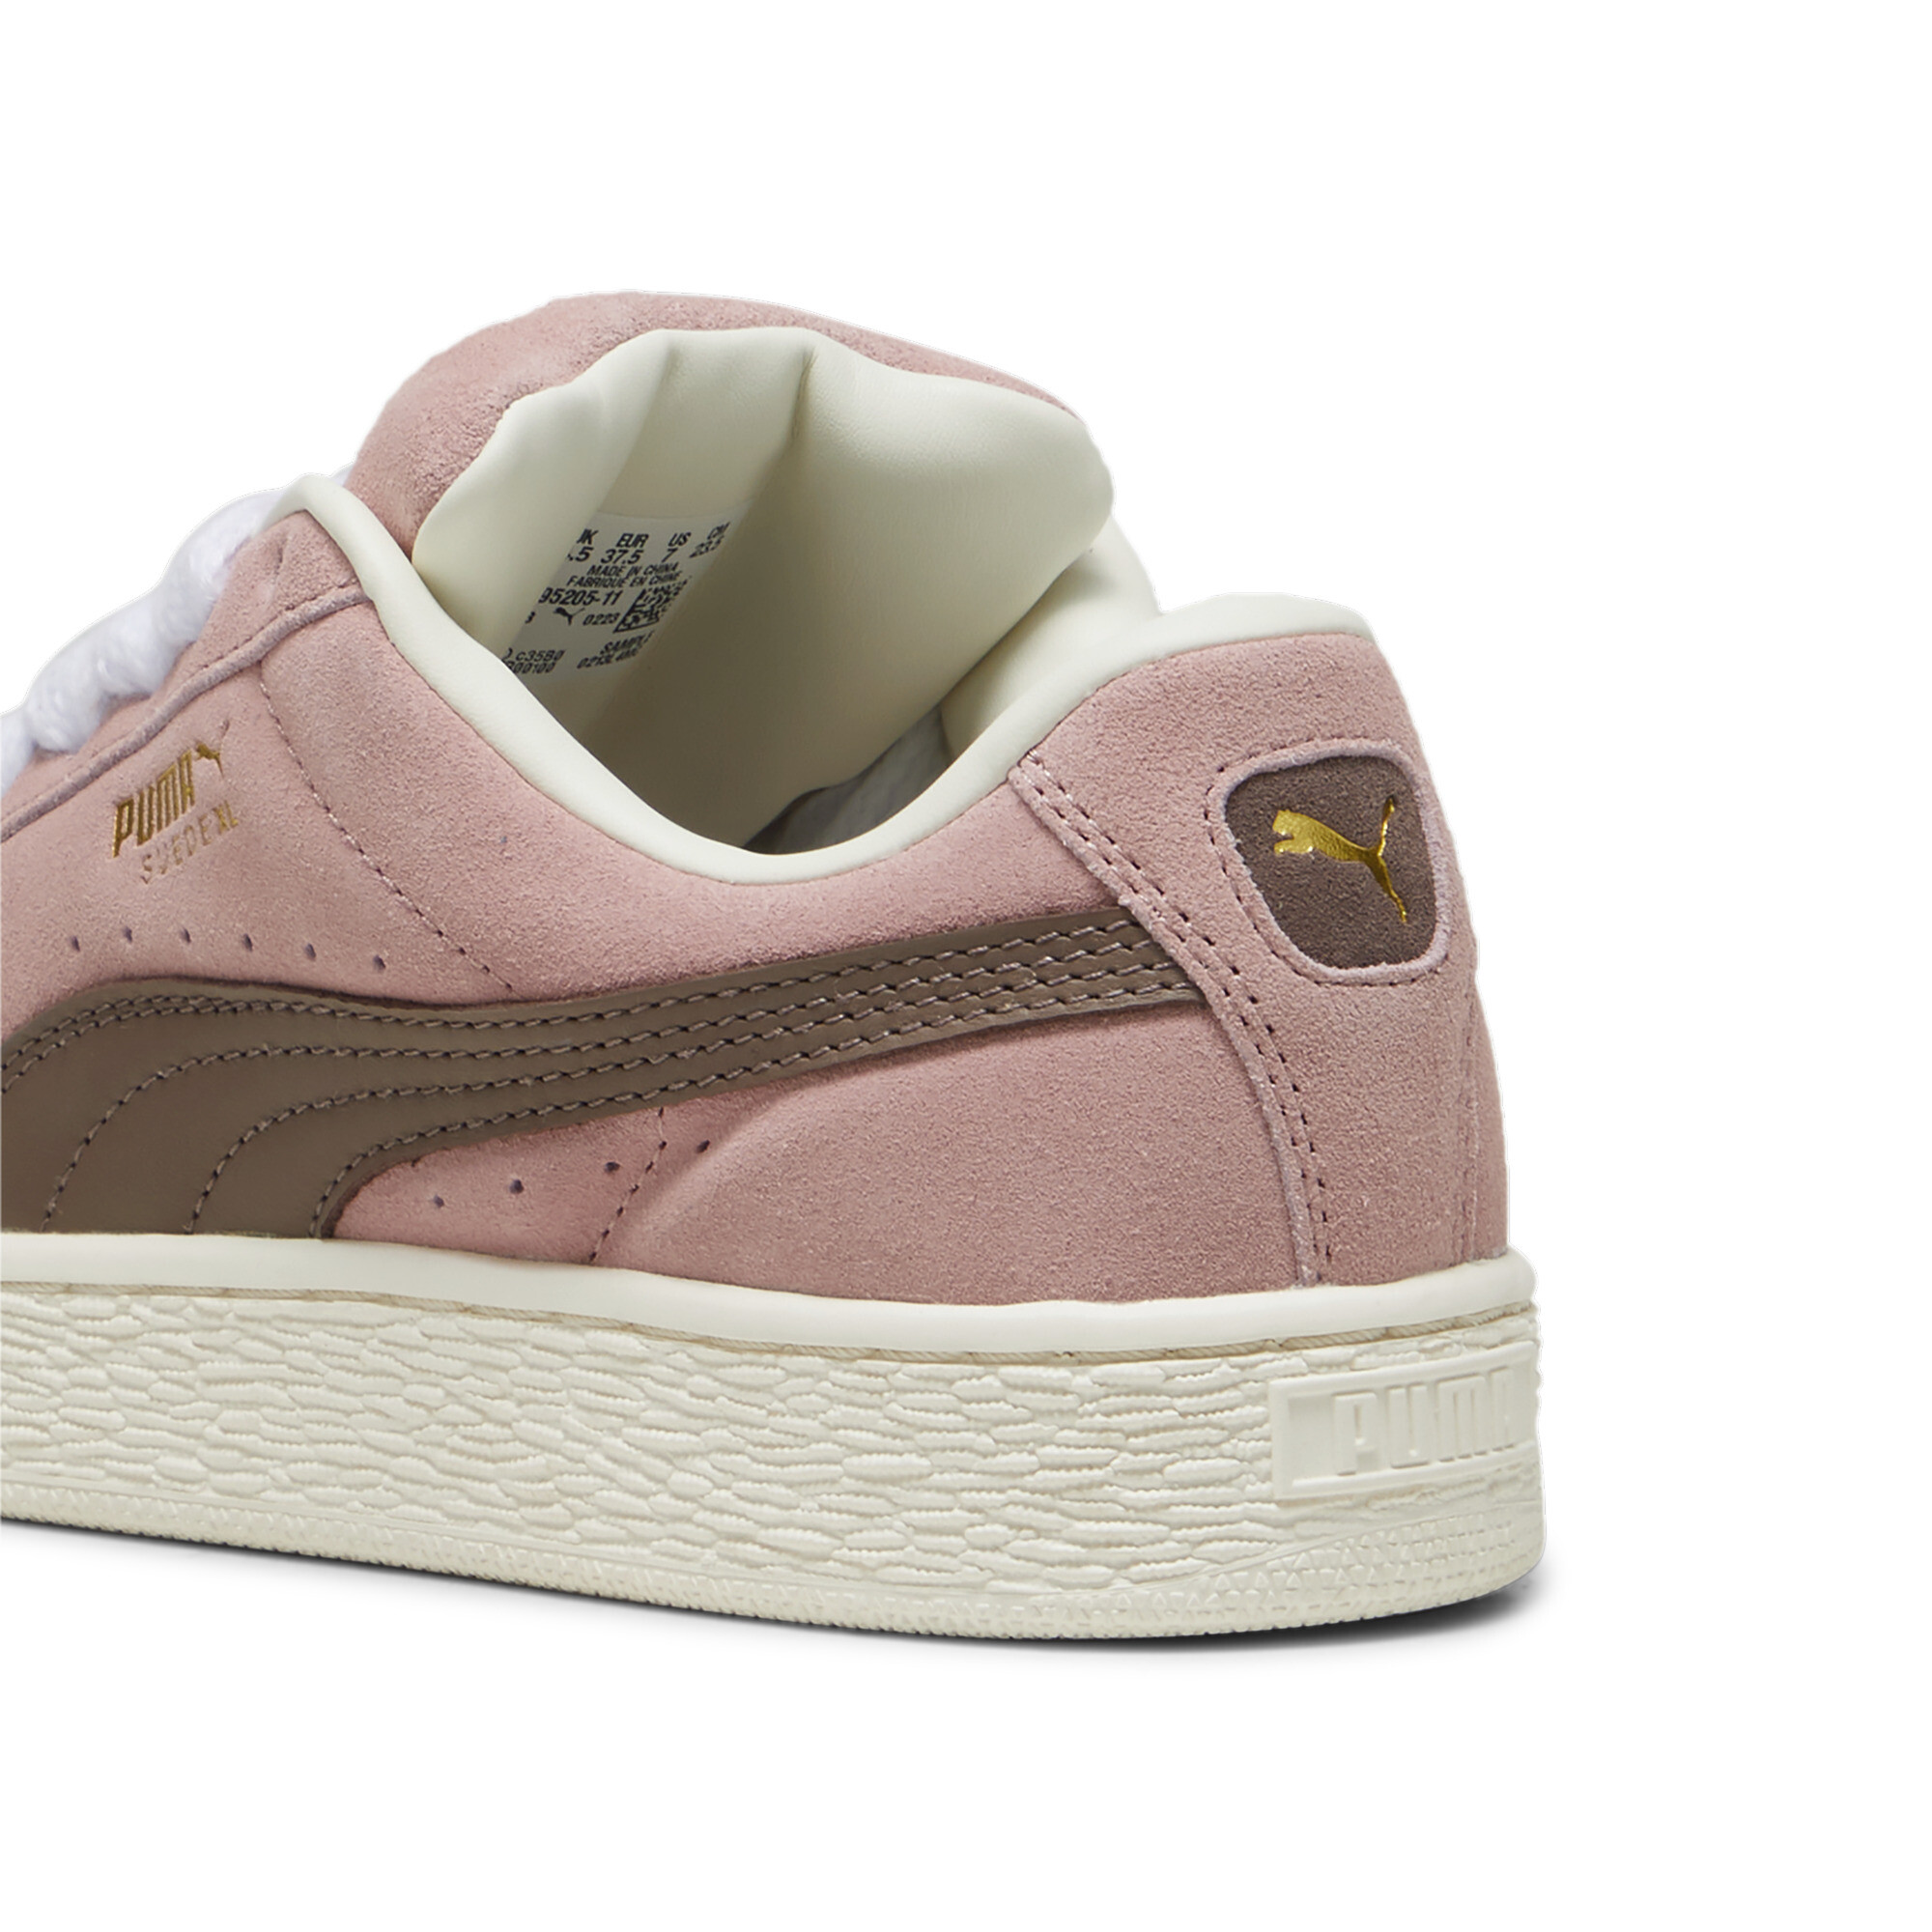 Puma Suede XL Sneakers Unisex, Pink, Size 45, Shoes